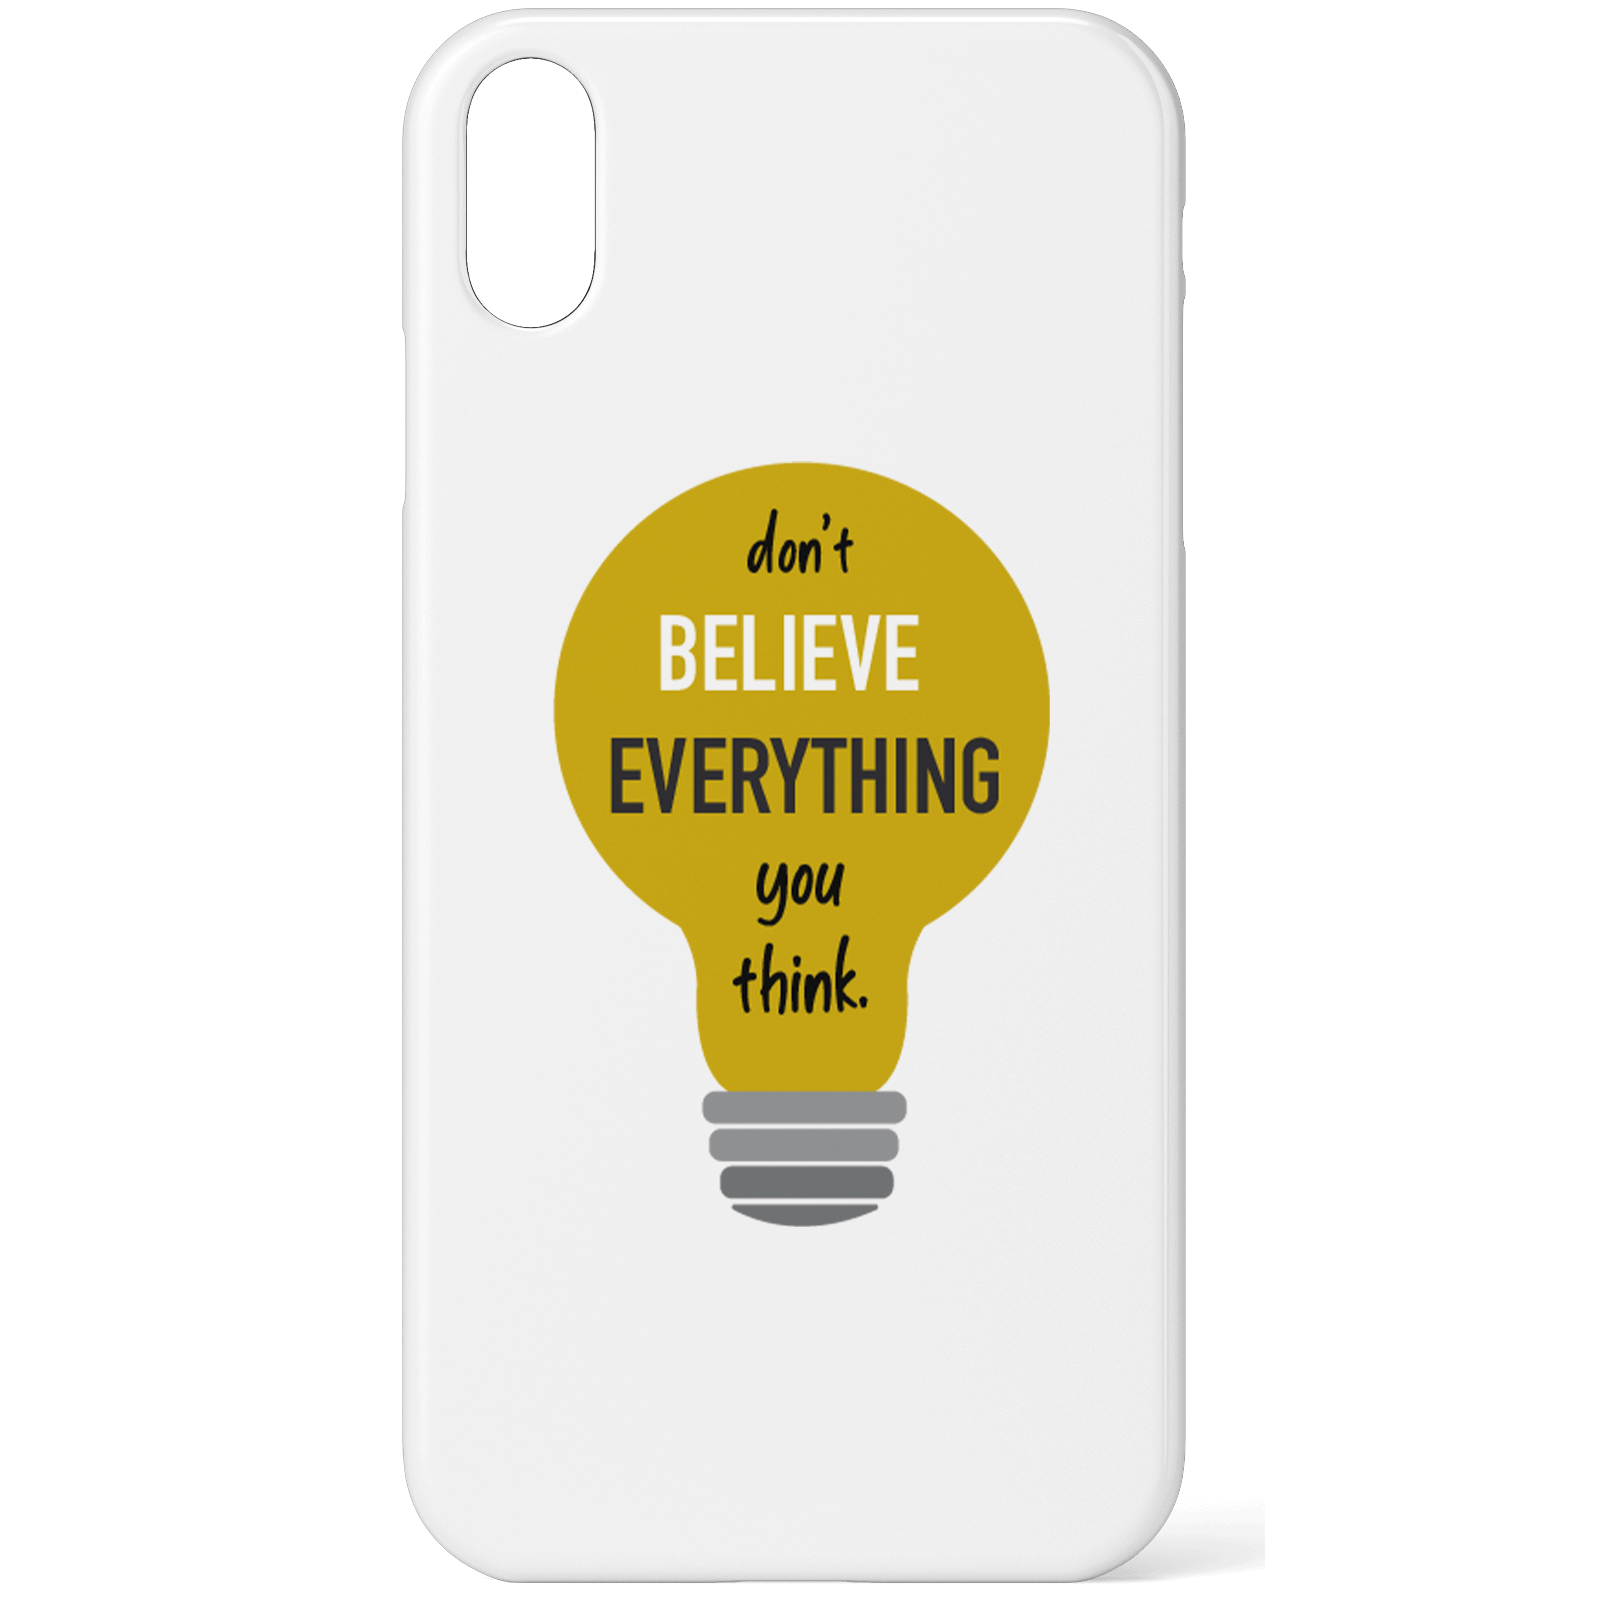 Don't Believe Everything You Think Phone Case for iPhone and Android - iPhone 5/5s - Snap Case - Matte